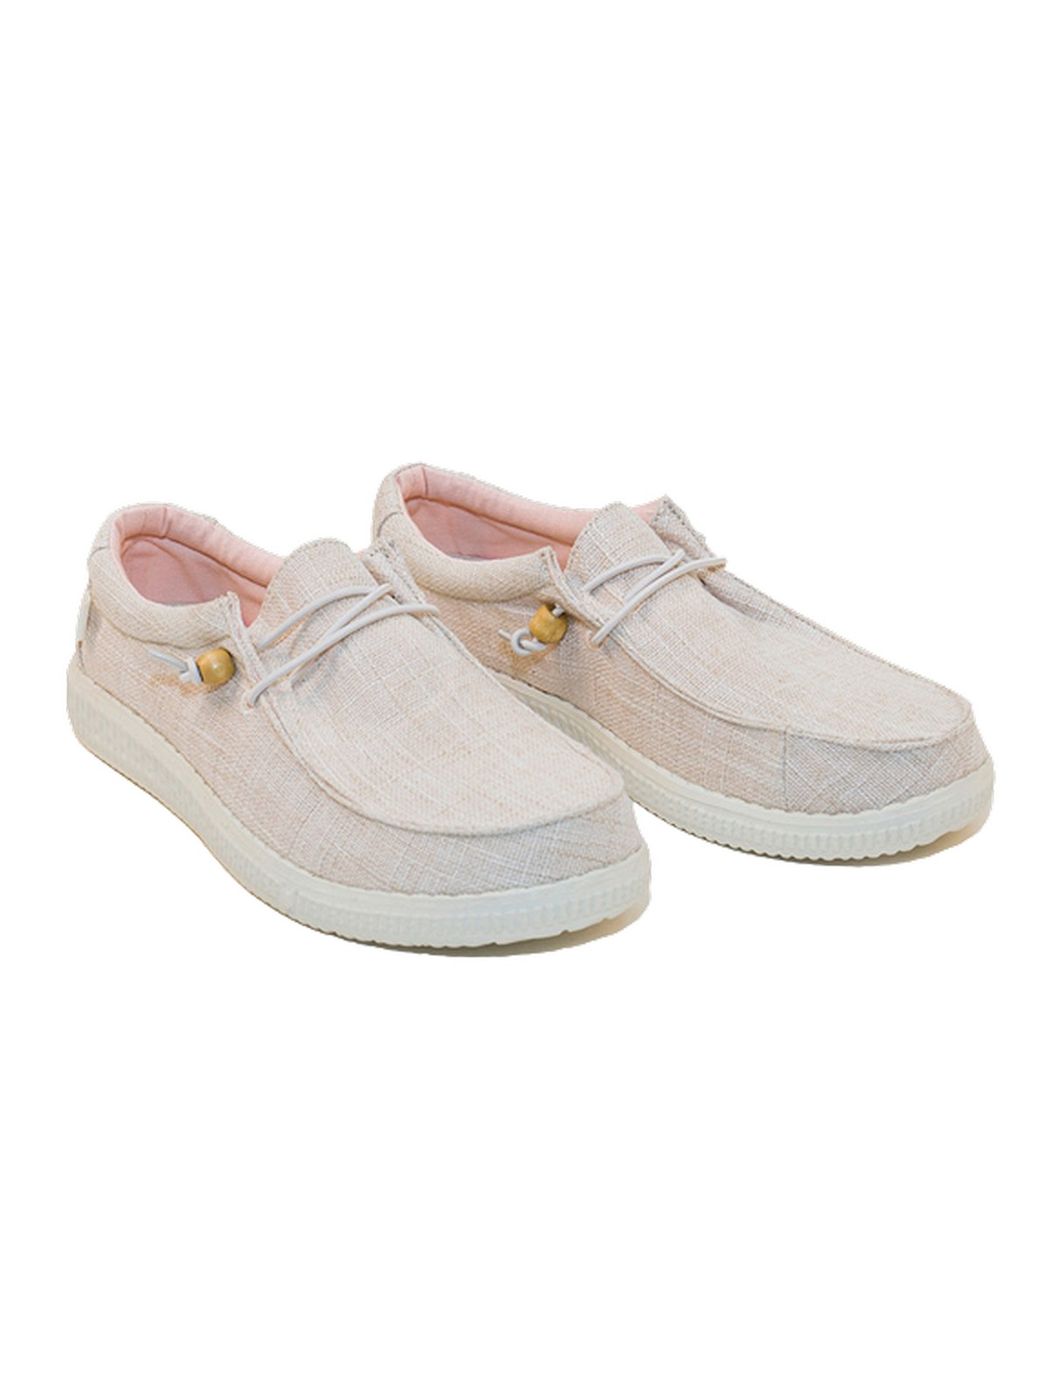 PITAS Mocassin Hommes WP150 WALLABY LINEN ARENA Beige